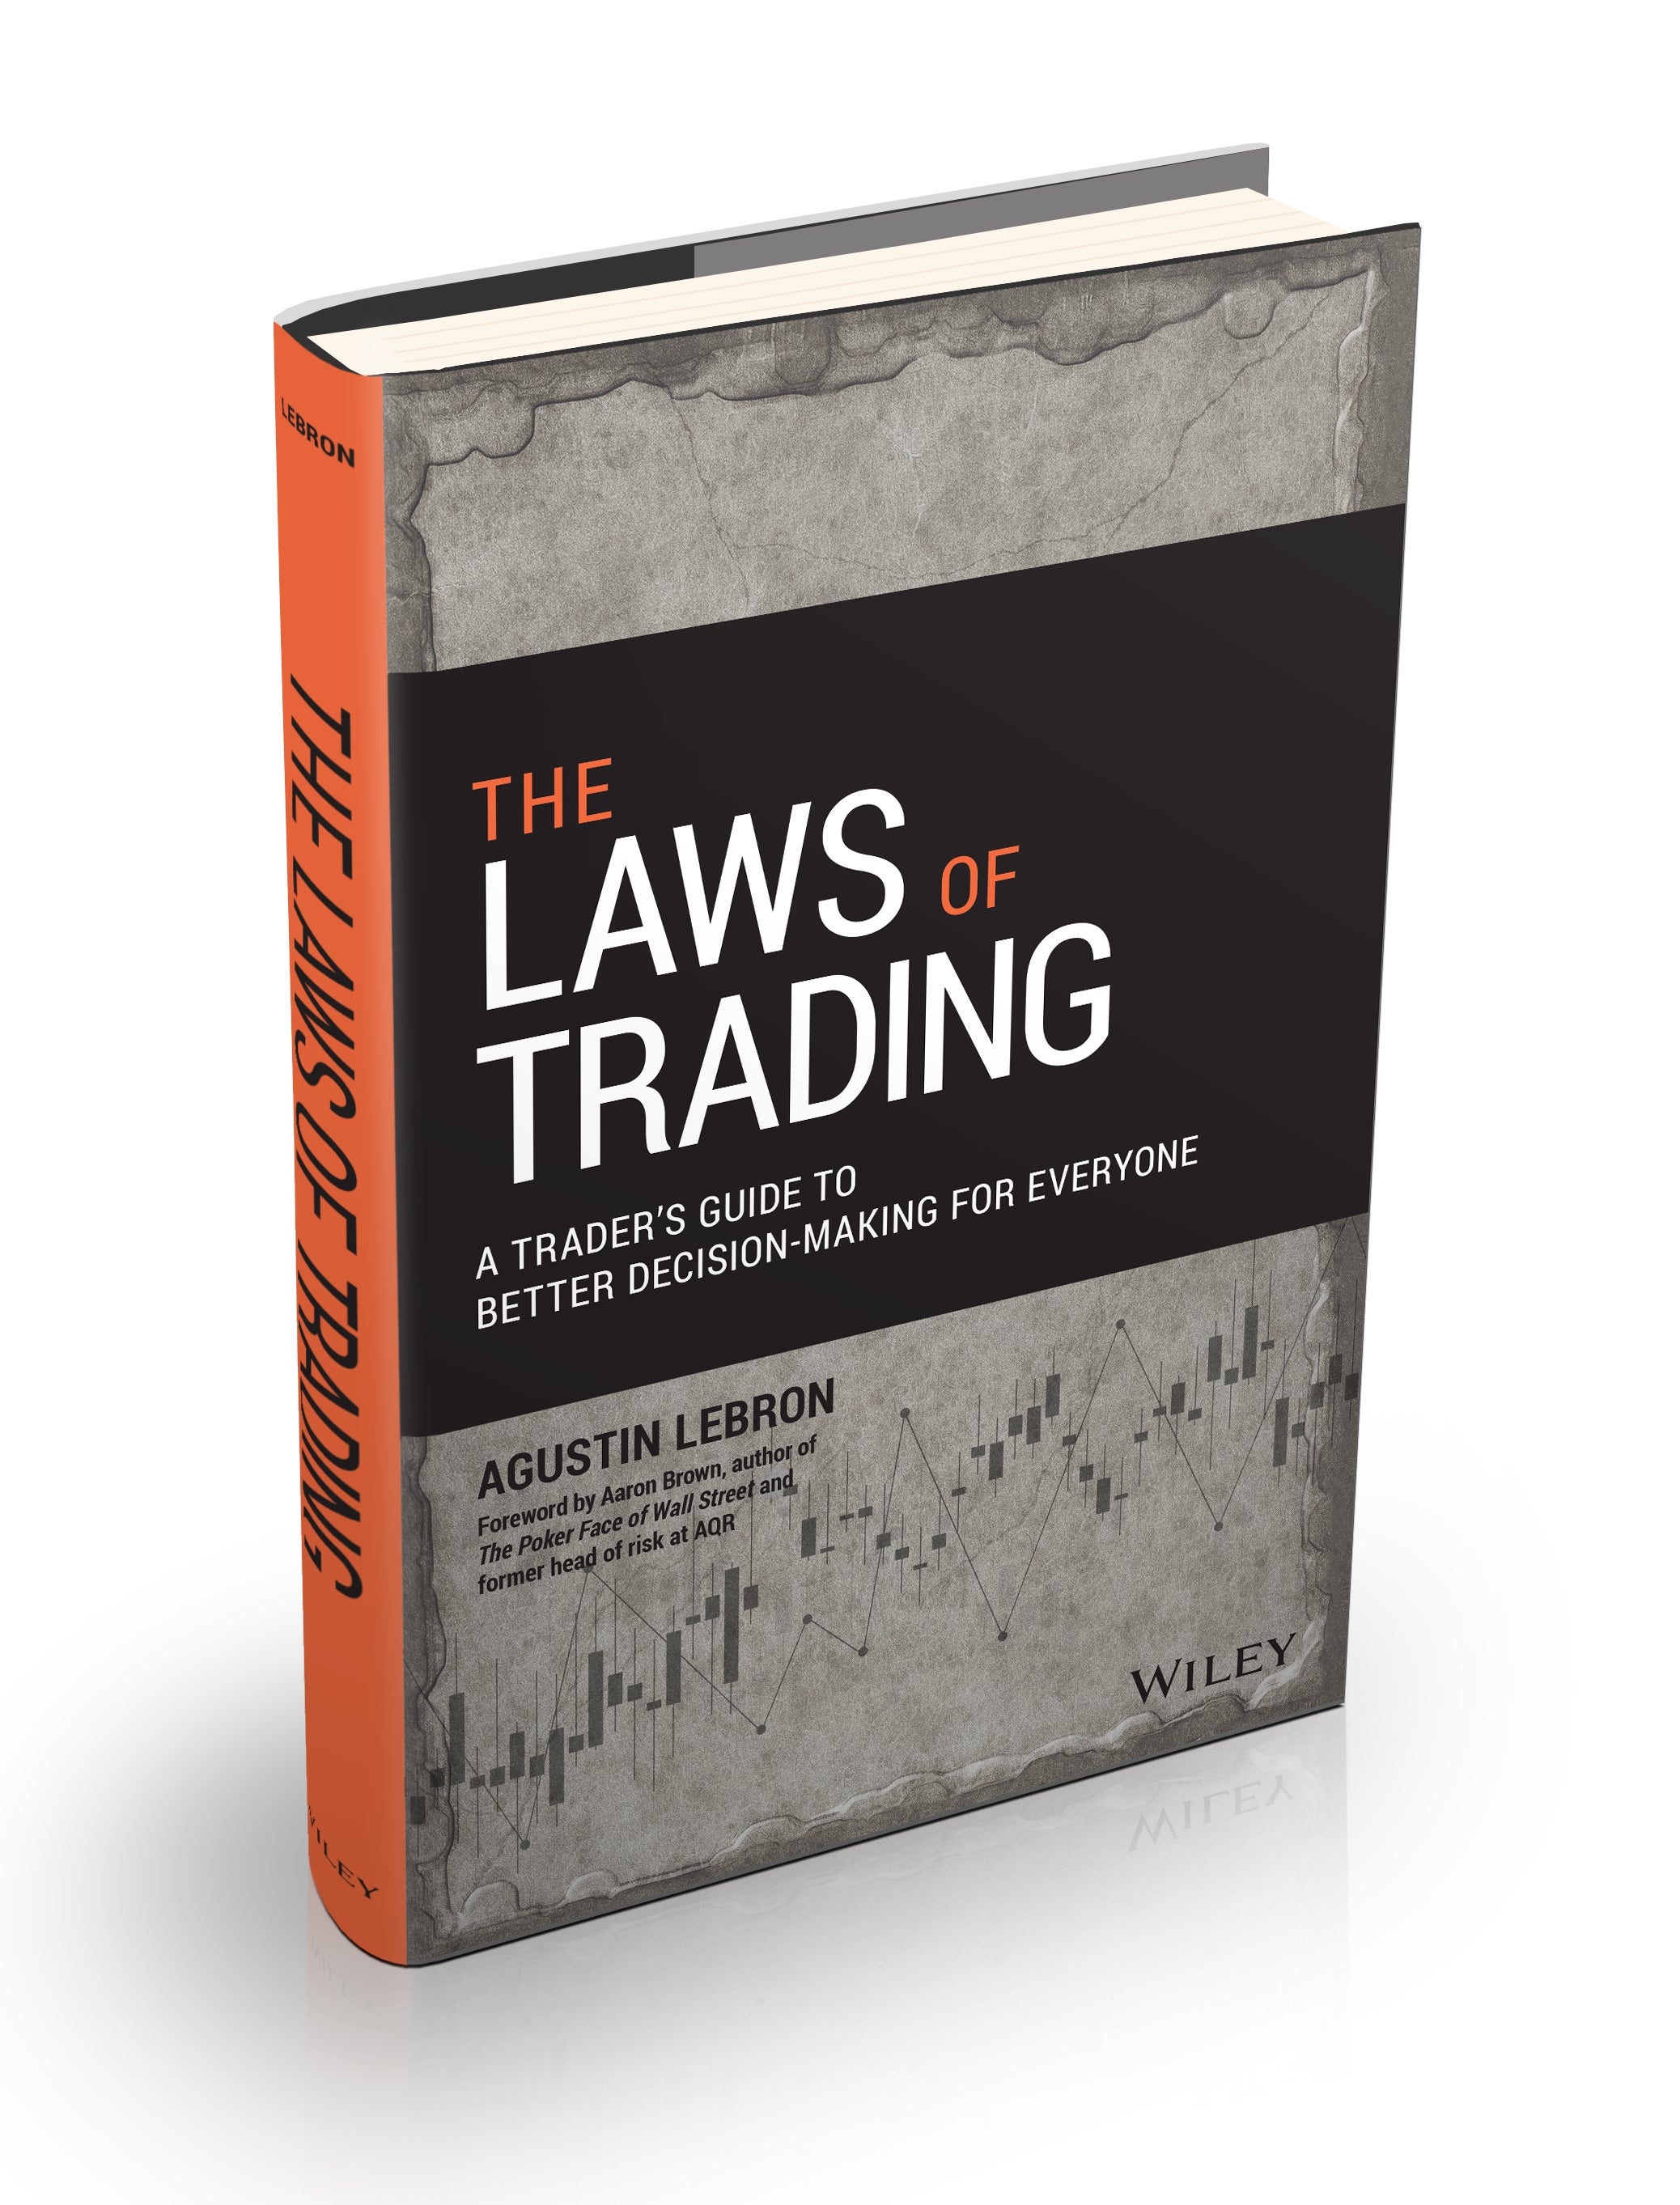 The Laws of Trading written by Agustin Lebron